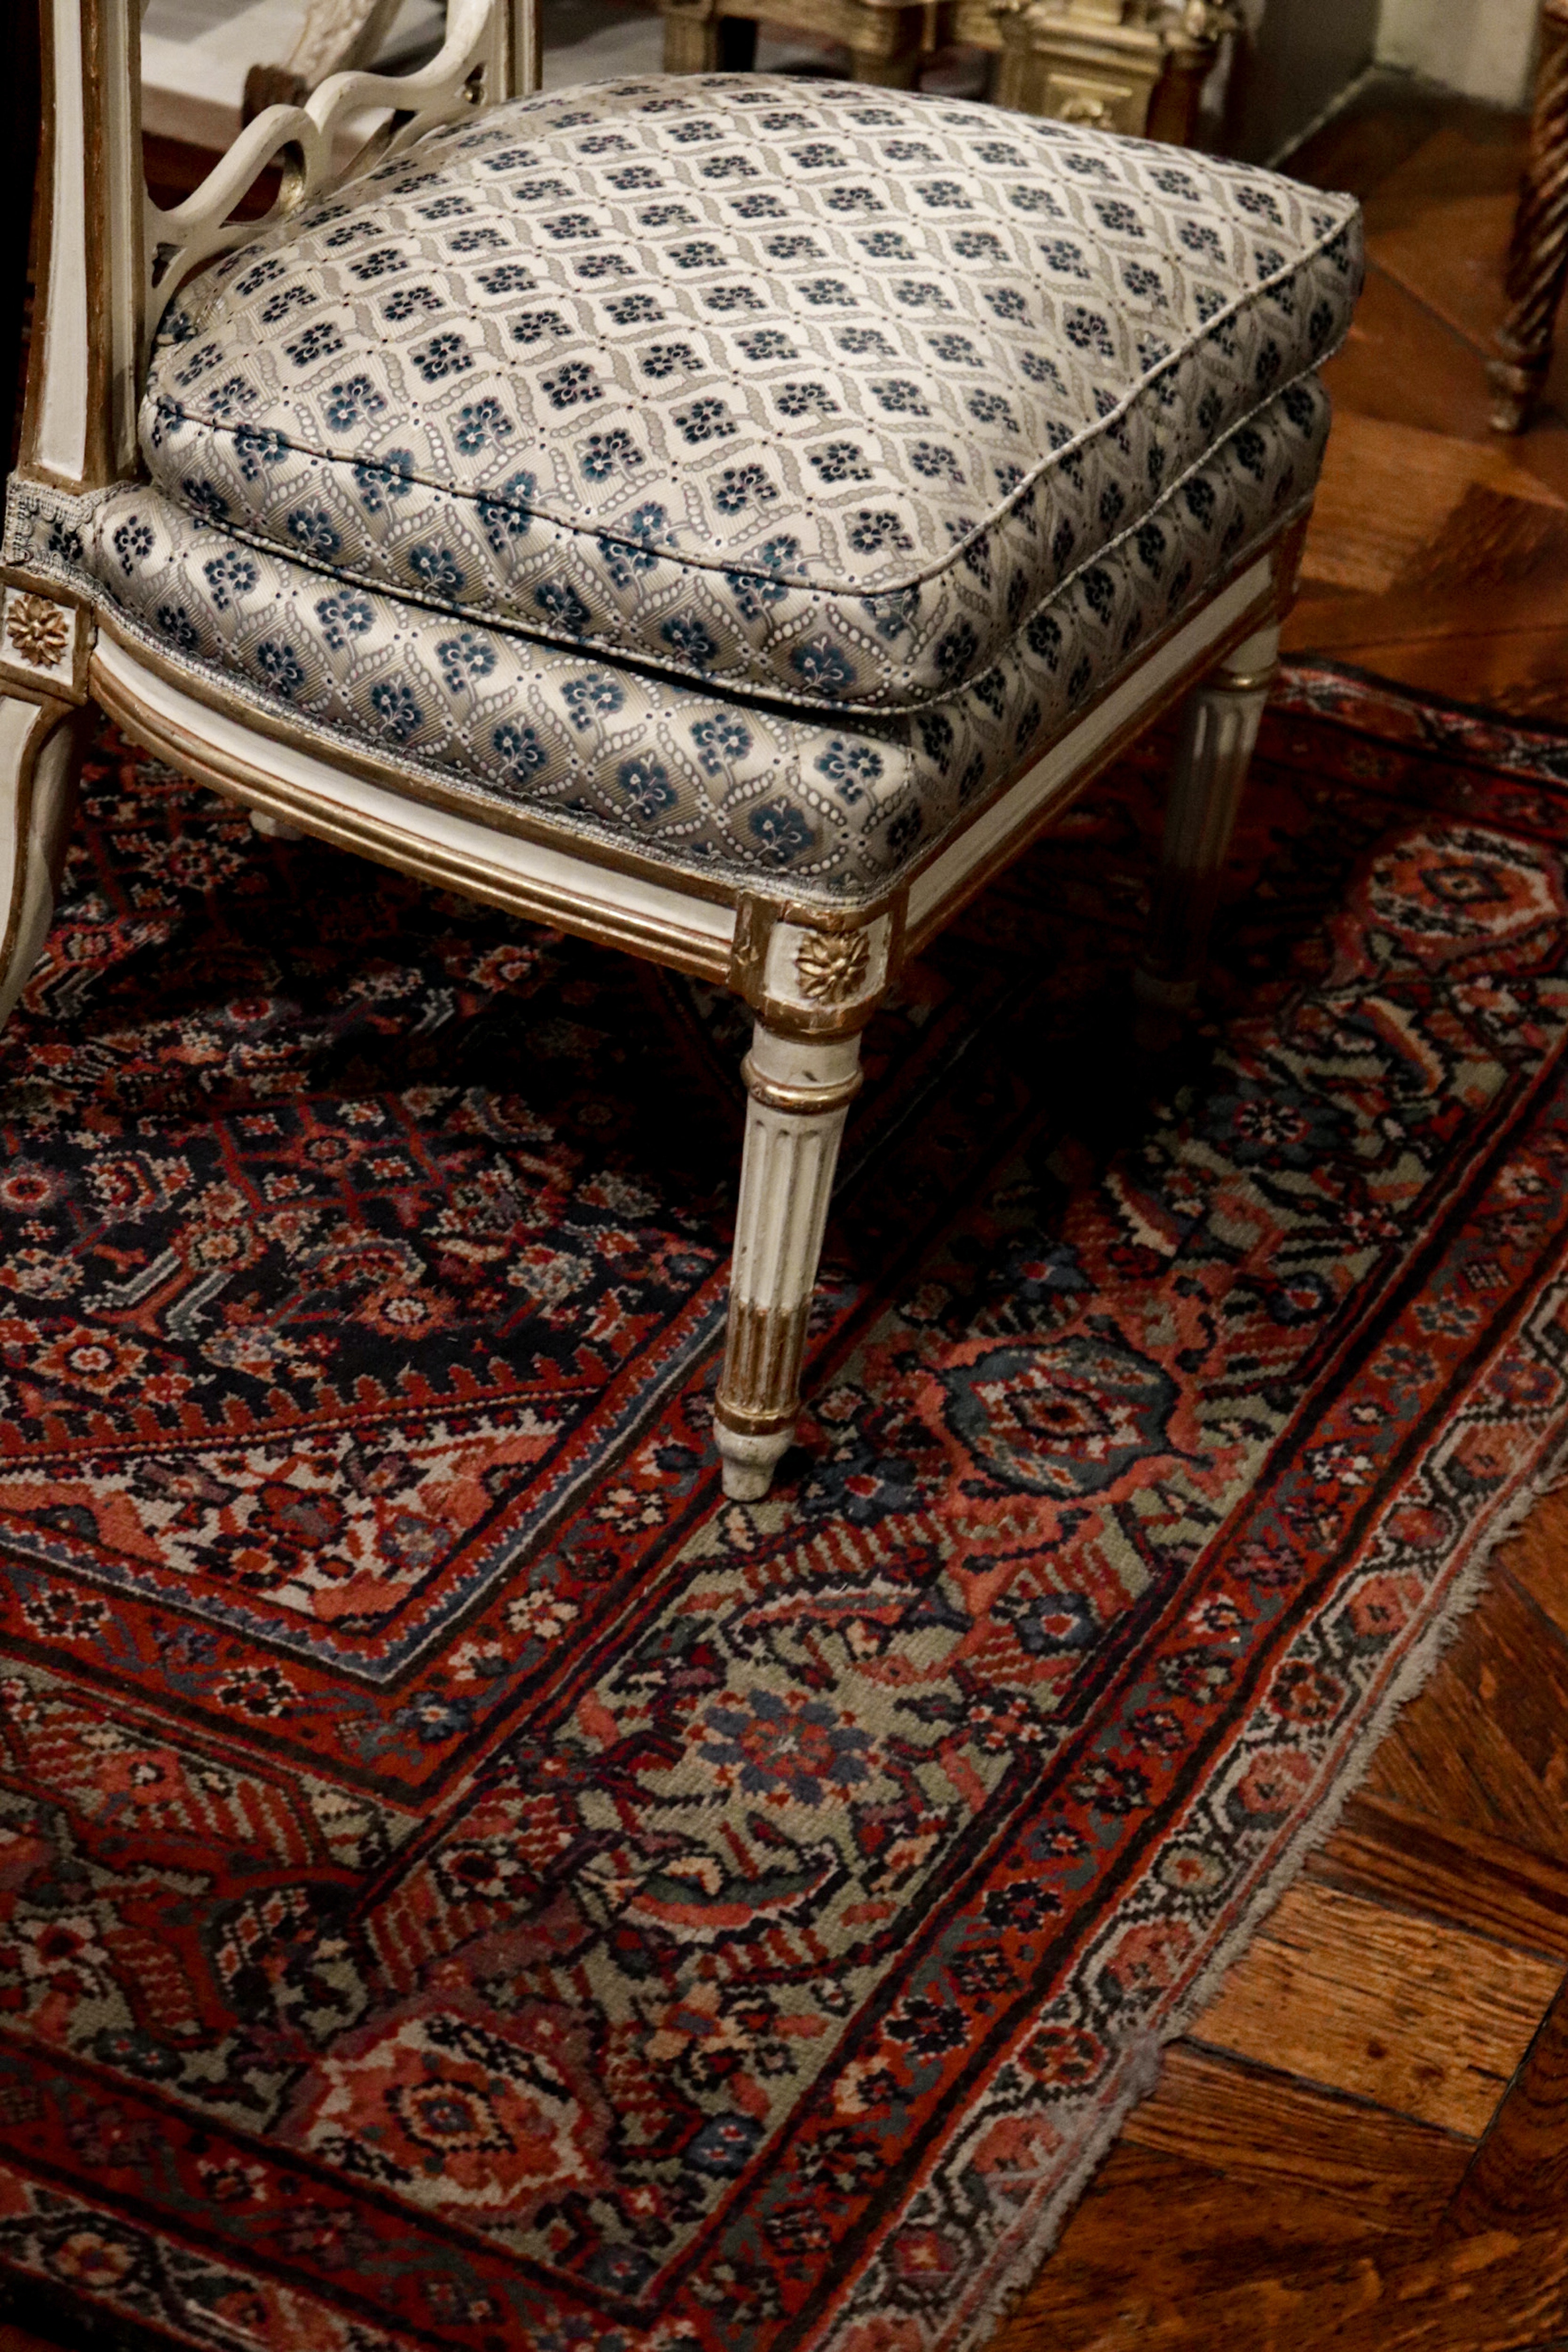 Chair on antique rug